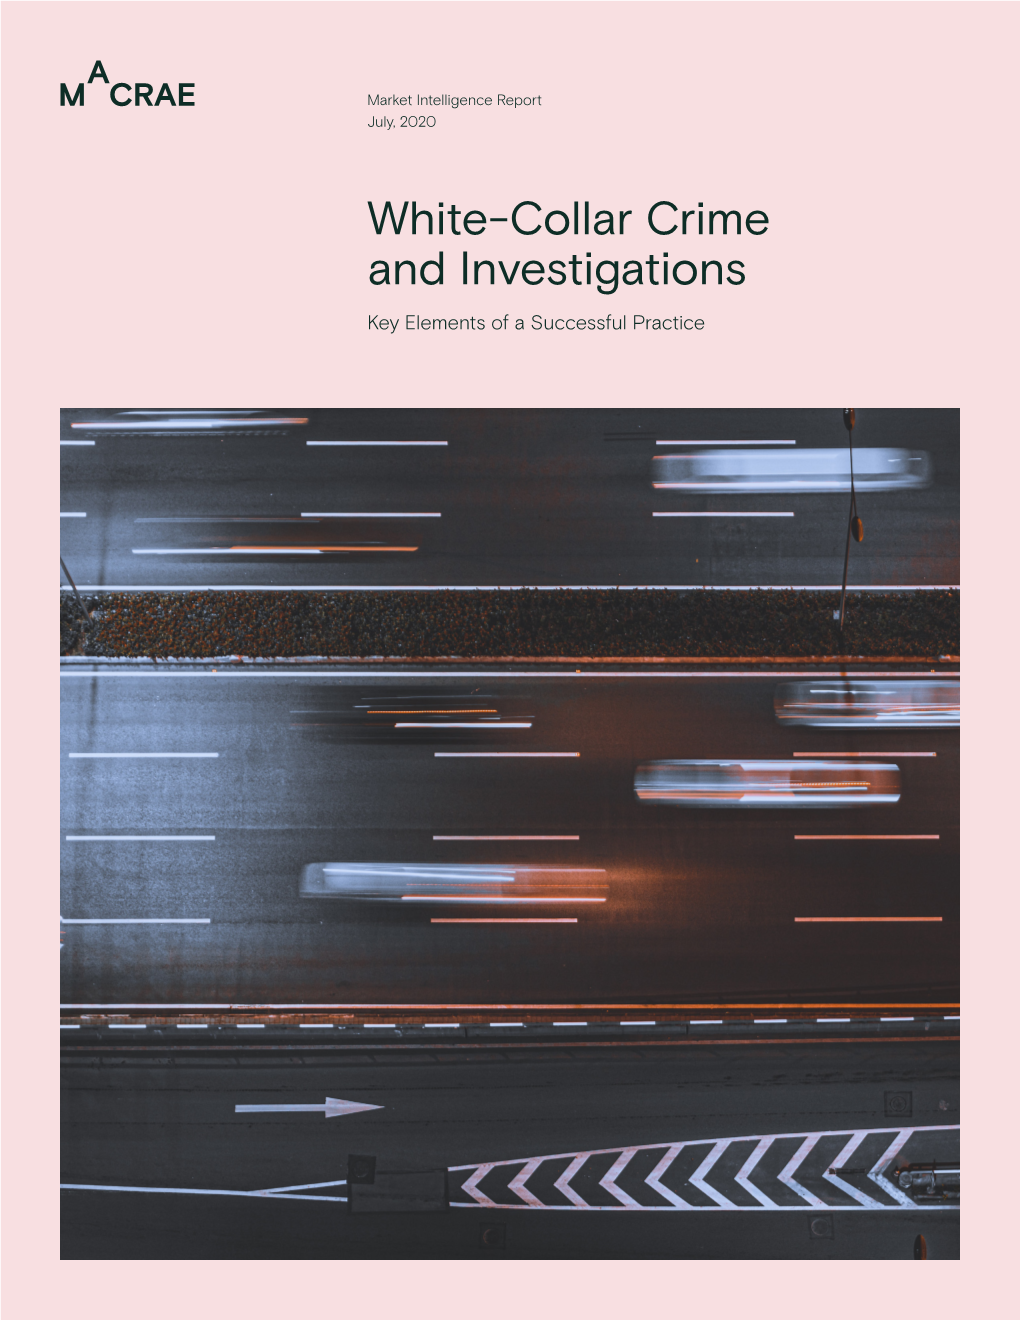 White-Collar Crime and Investigations Key Elements of a Successful Practice EXECUTIVE SUMMARY